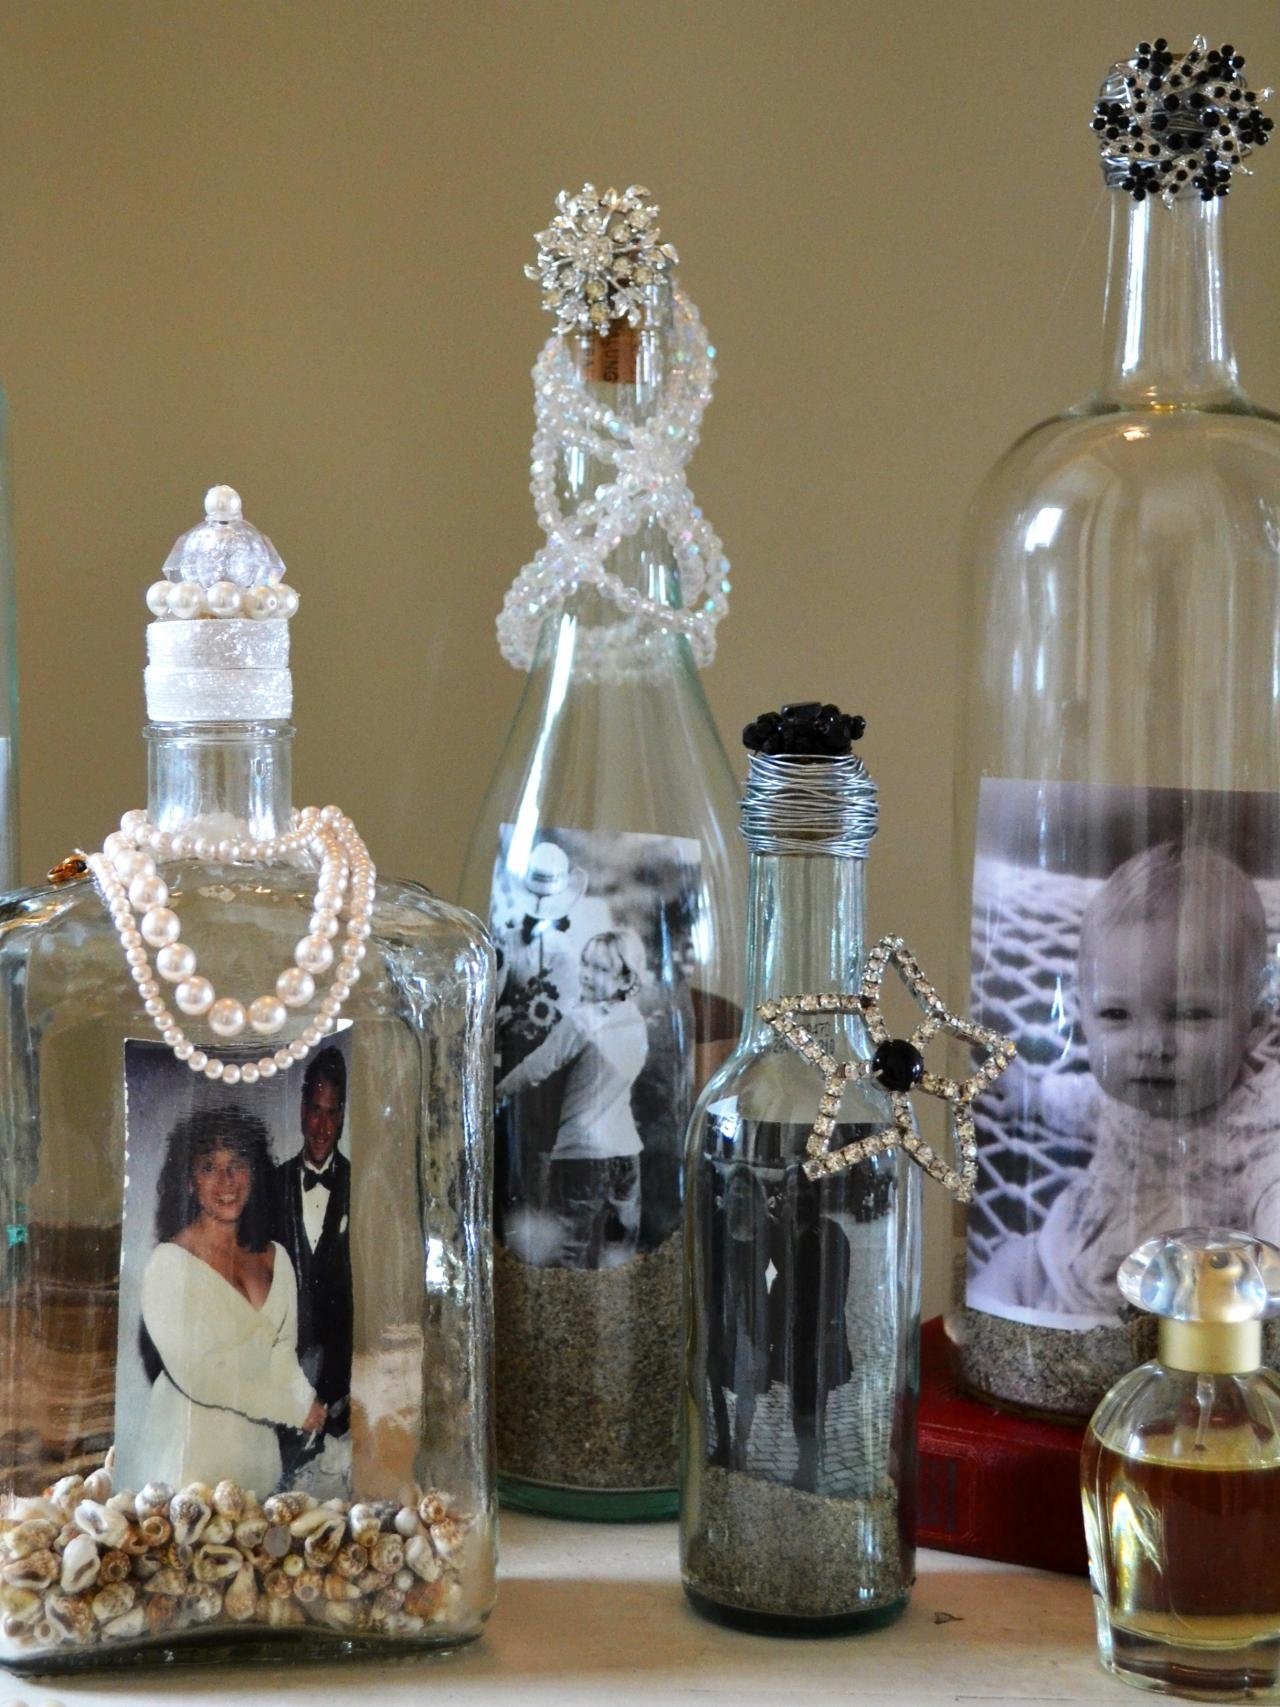 10 Great Ideas For Empty Wine Bottles how to turn old bottles into picture frames empty wine bottles 2022